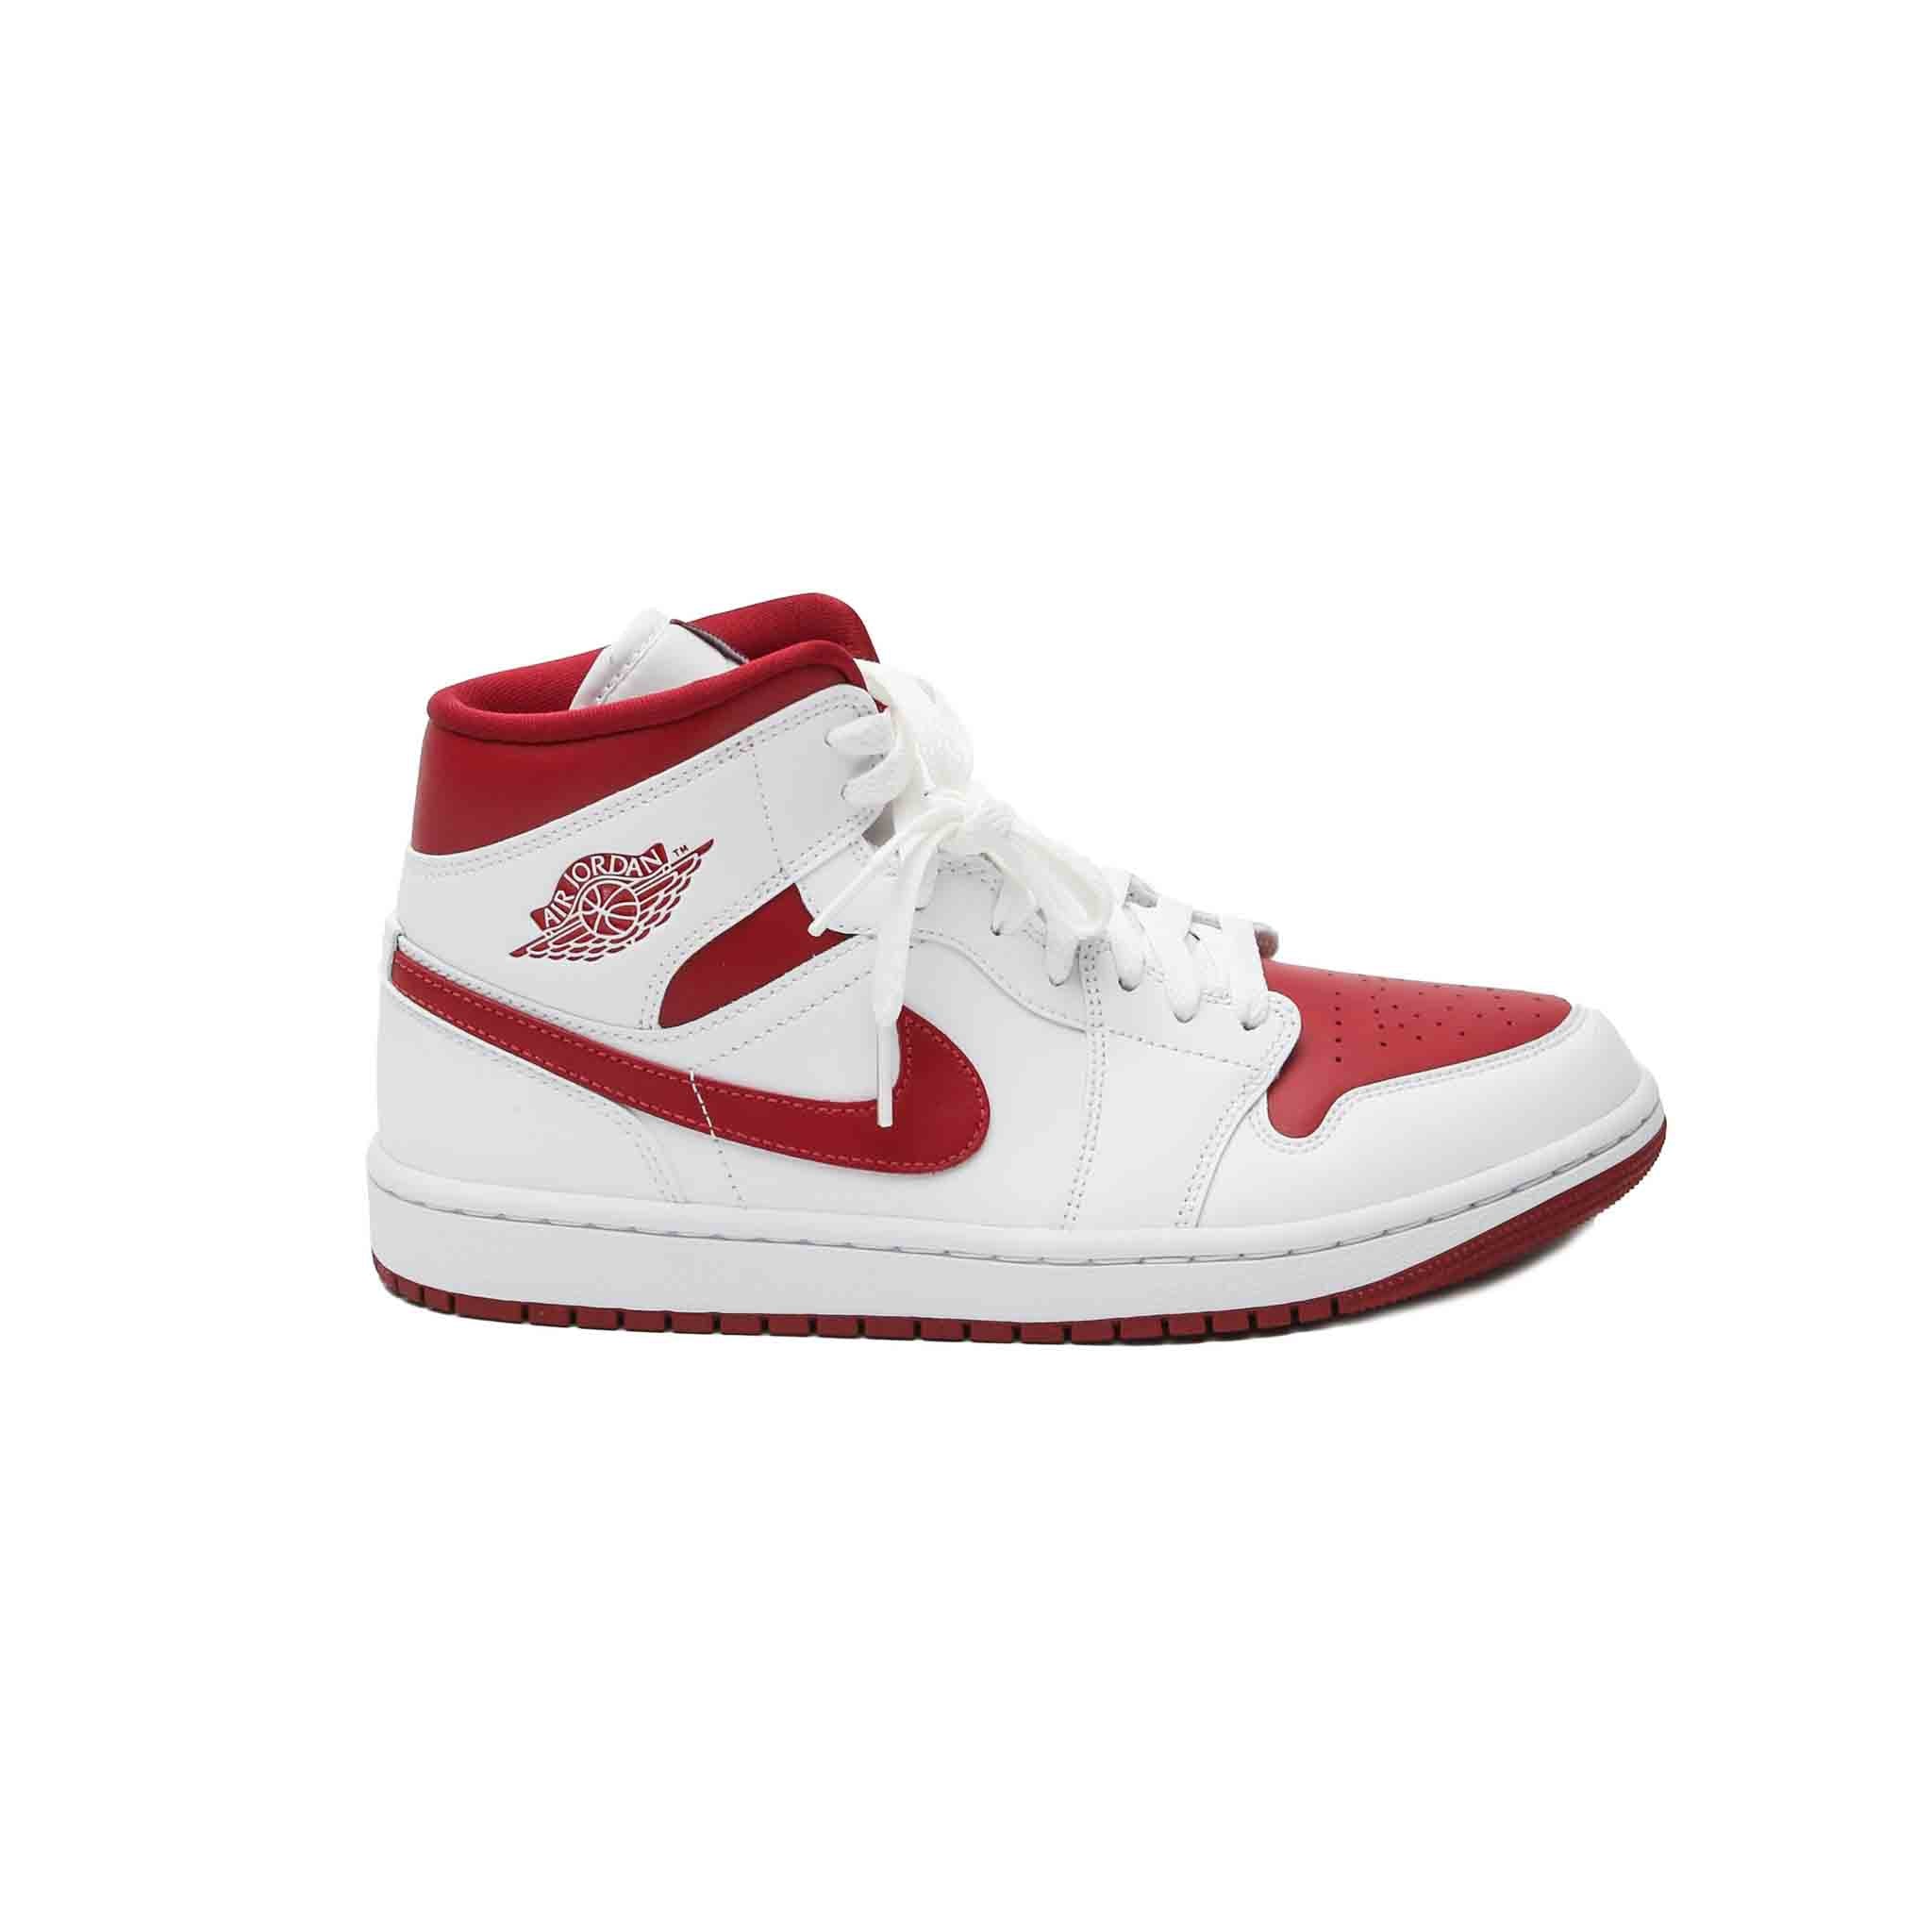 The Nike Air Jordan 1 Mid is a stylish, high-performance sneaker that is perfect for casual wear. The white and red leather give this shoe a classic, sporty look, while the rubber sole provides traction and durability. Whether paired with jeans or leggings, this sneaker is sure to become a go-to favourite for any woman.